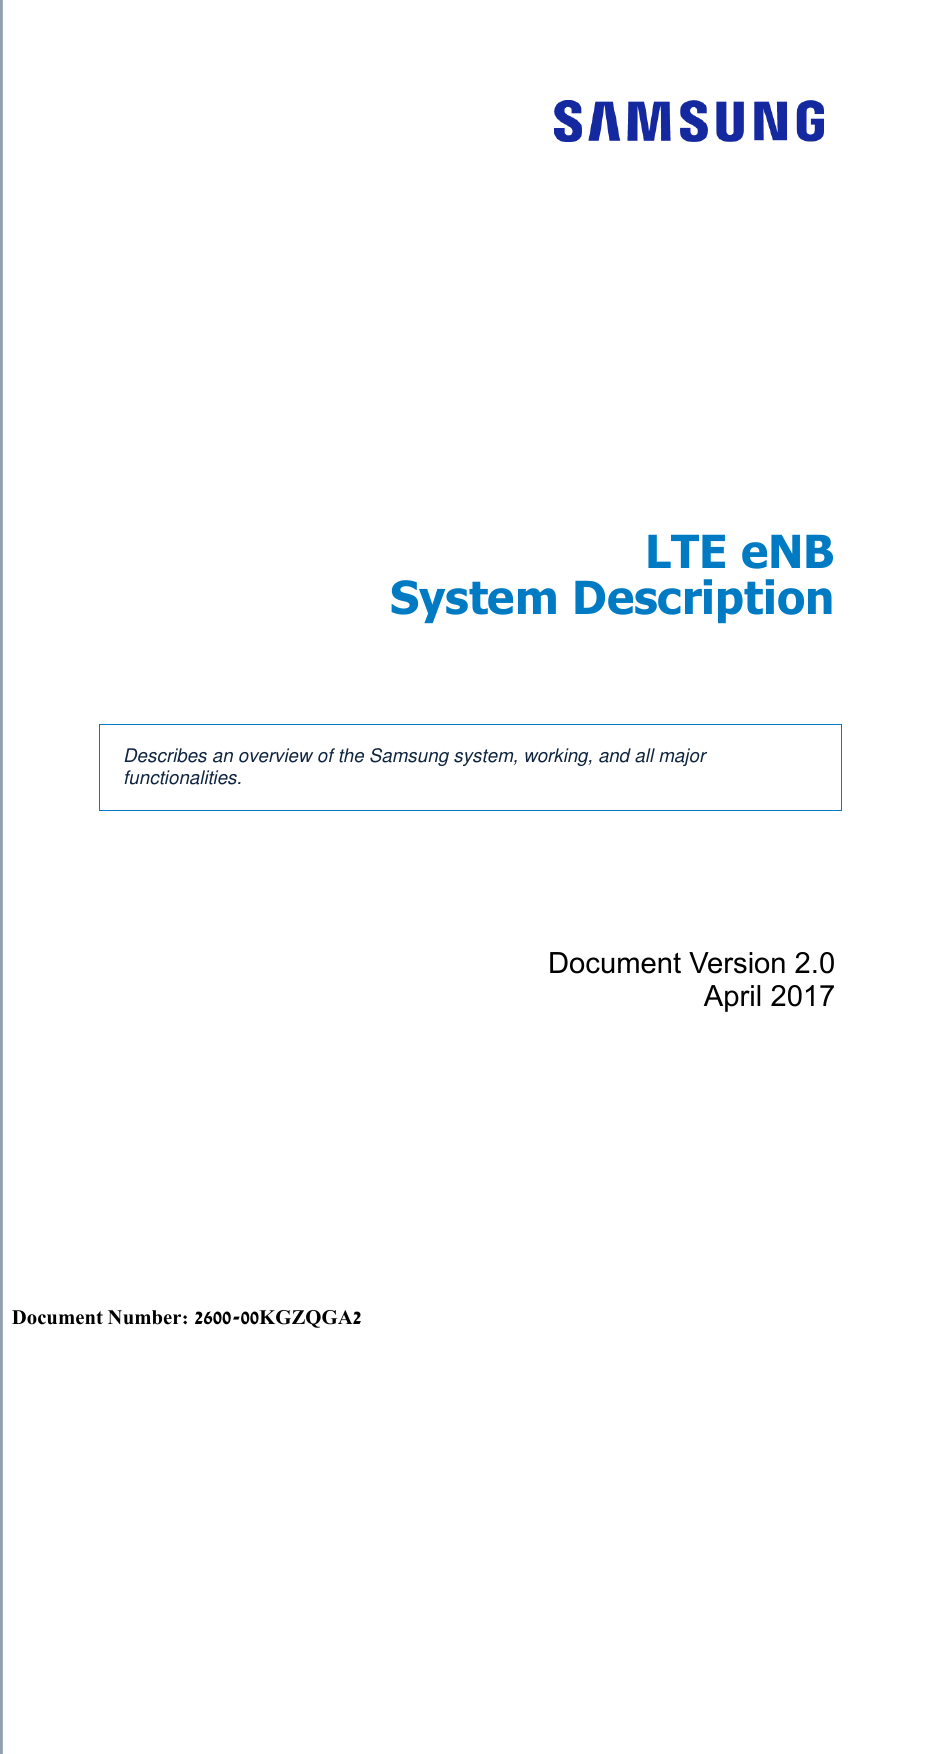     Radio Access Network  LTE eNB System Description   Describes an overview of the Samsung system, working, and all major functionalities. Document Version 2.0 April 2017      Document Number: 2600-00KGZQGA2 